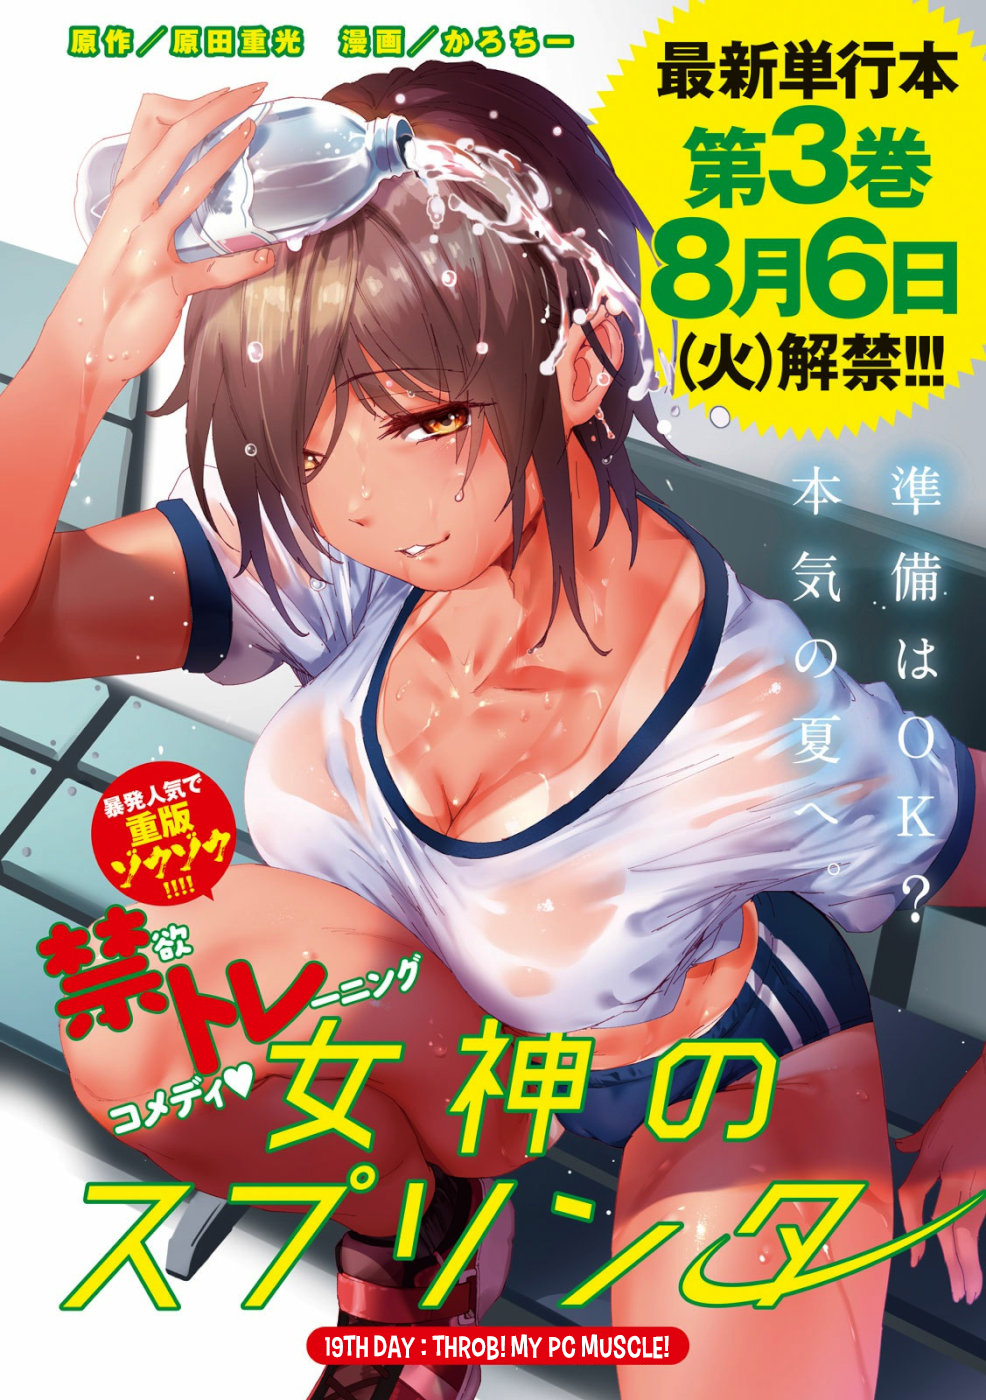 Megami No Sprinter Vol.4 Chapter 19: Throb! My Pc Muscle! - Picture 2